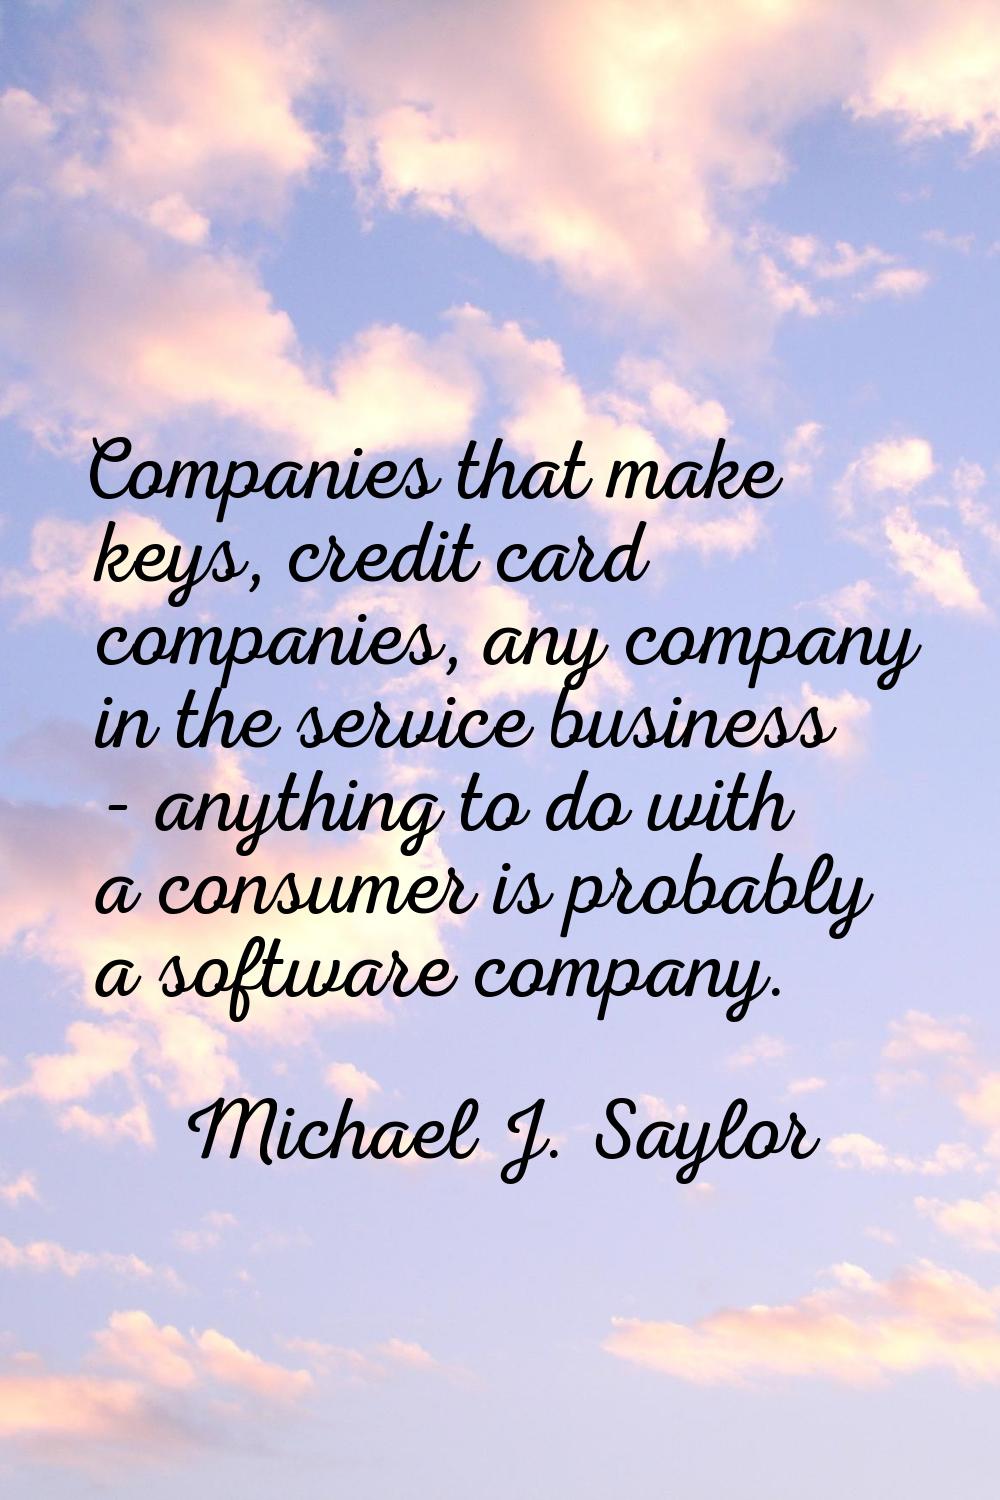 Companies that make keys, credit card companies, any company in the service business - anything to 